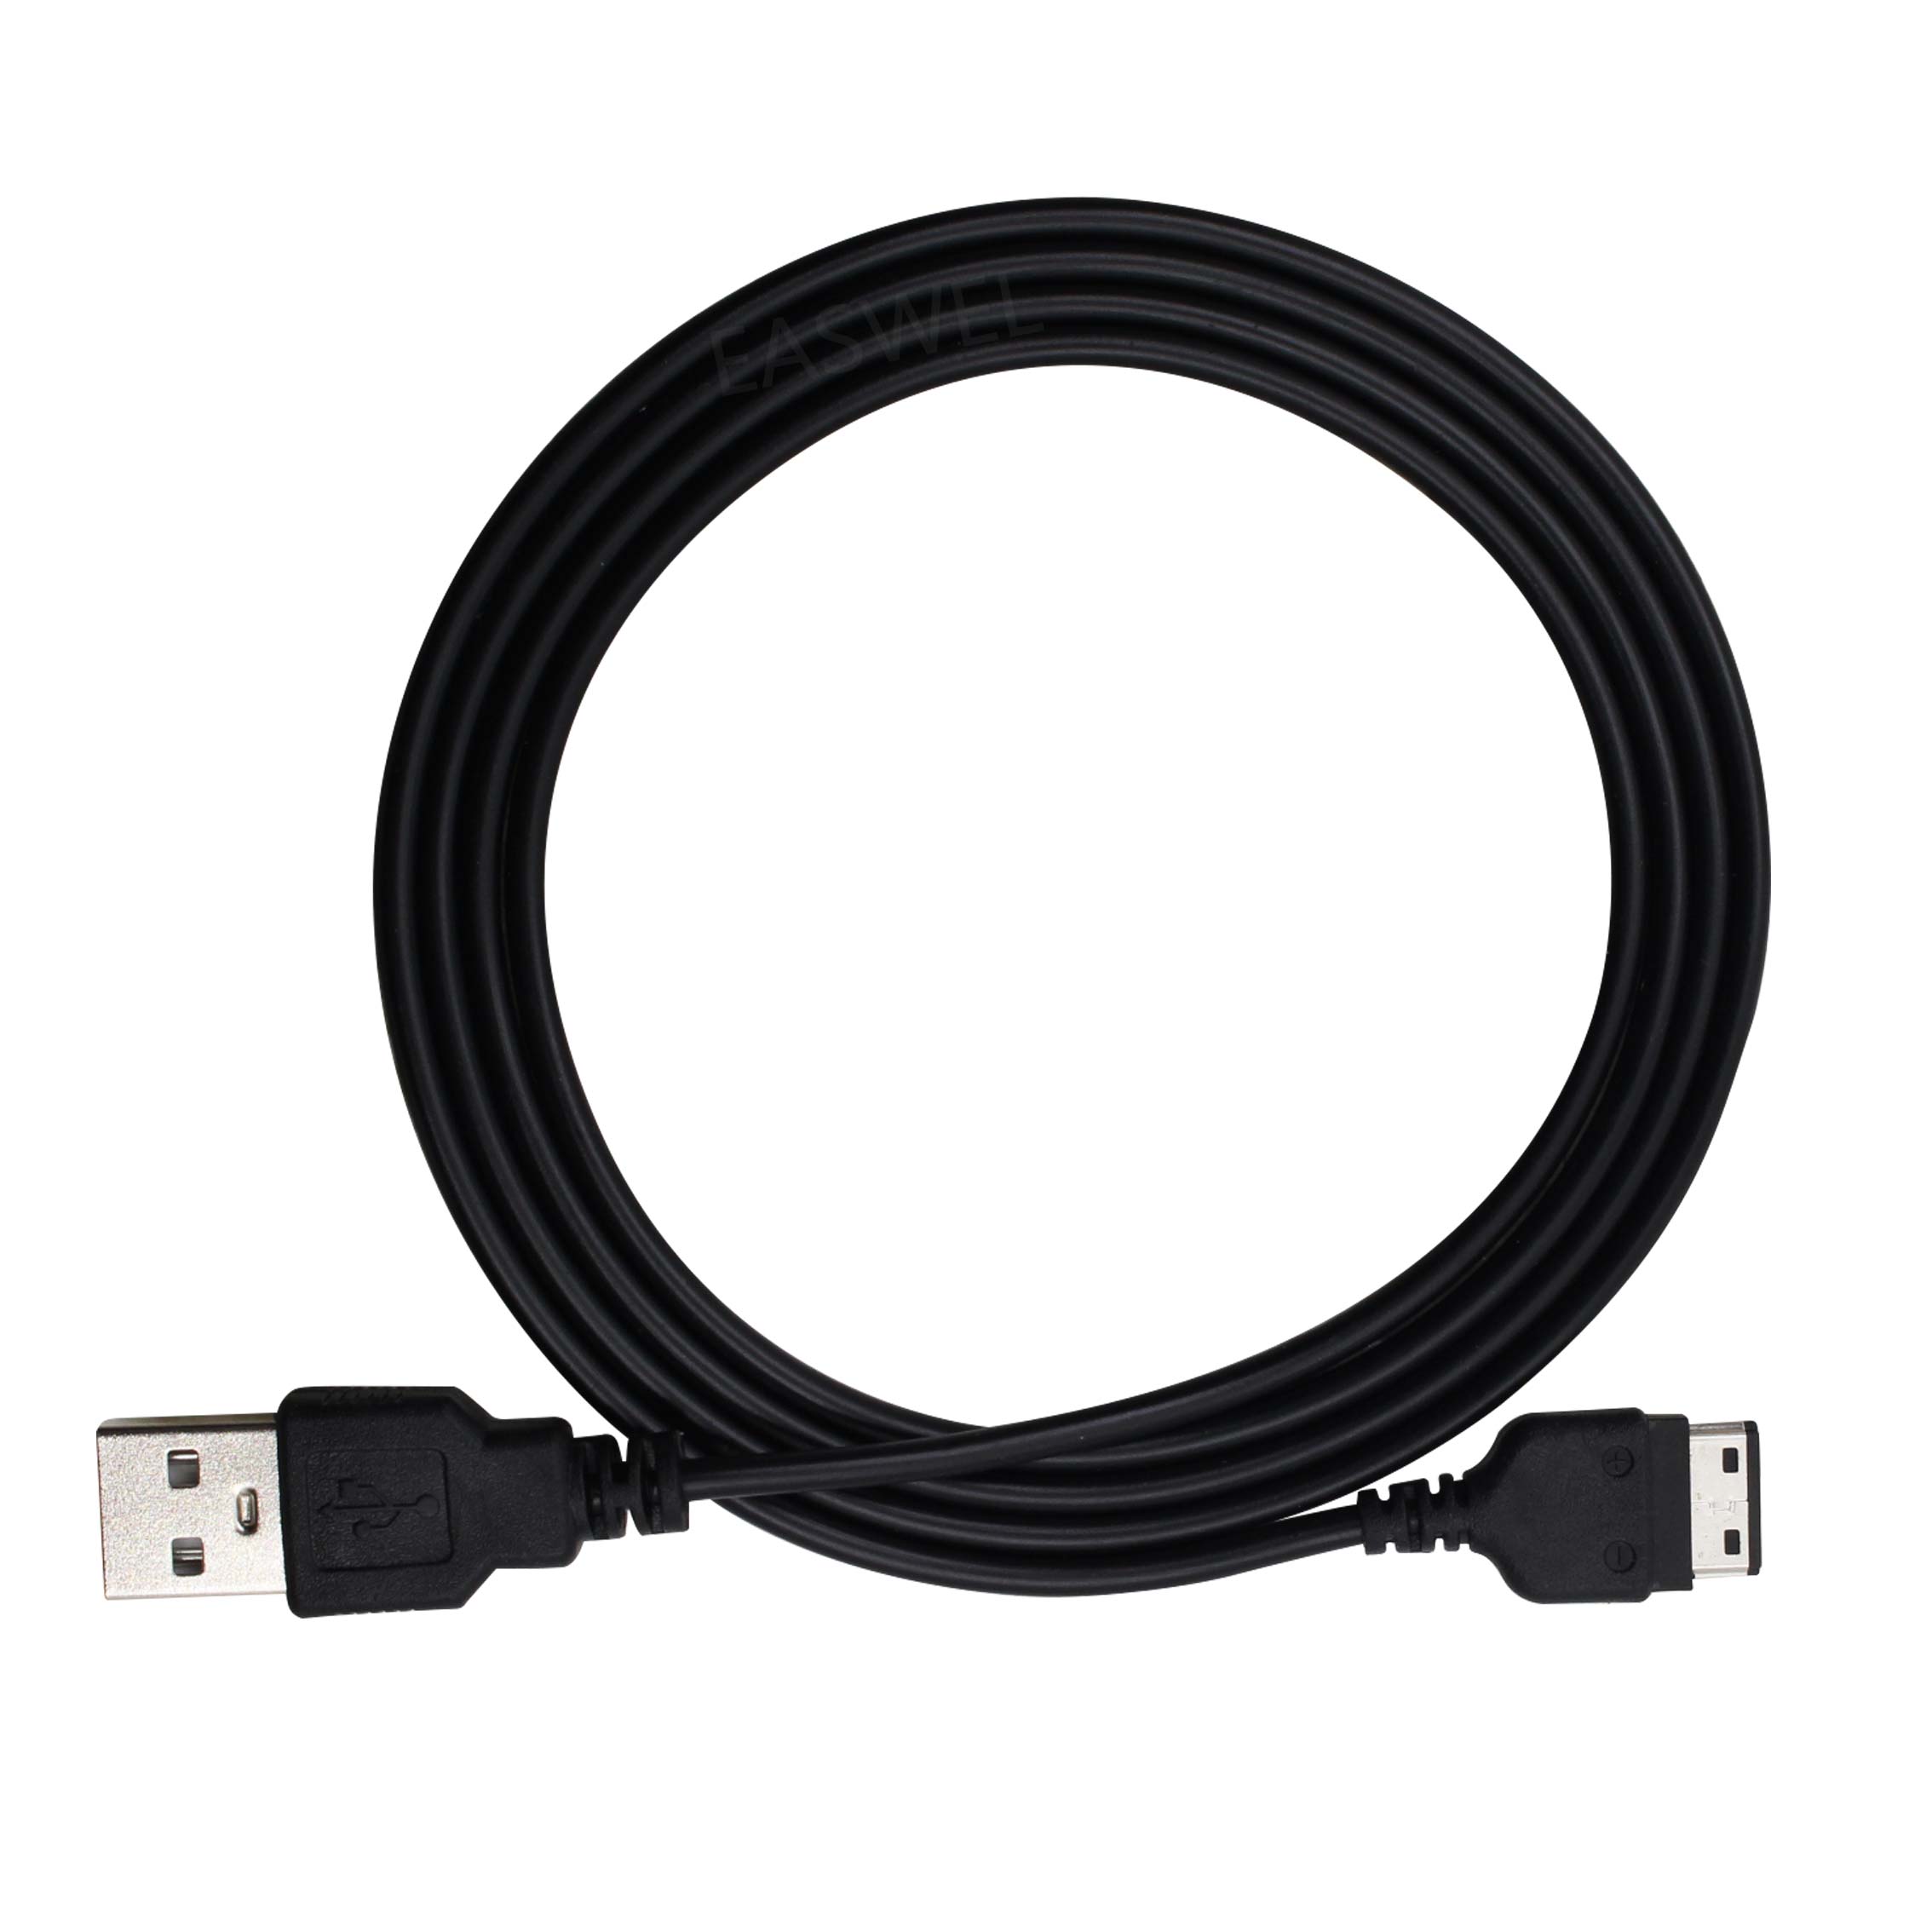 Usb Charger Data Cable Koord Voor Samsung Gt-e2121 Sgh-e215 Gt-e2152 Gt-e2210